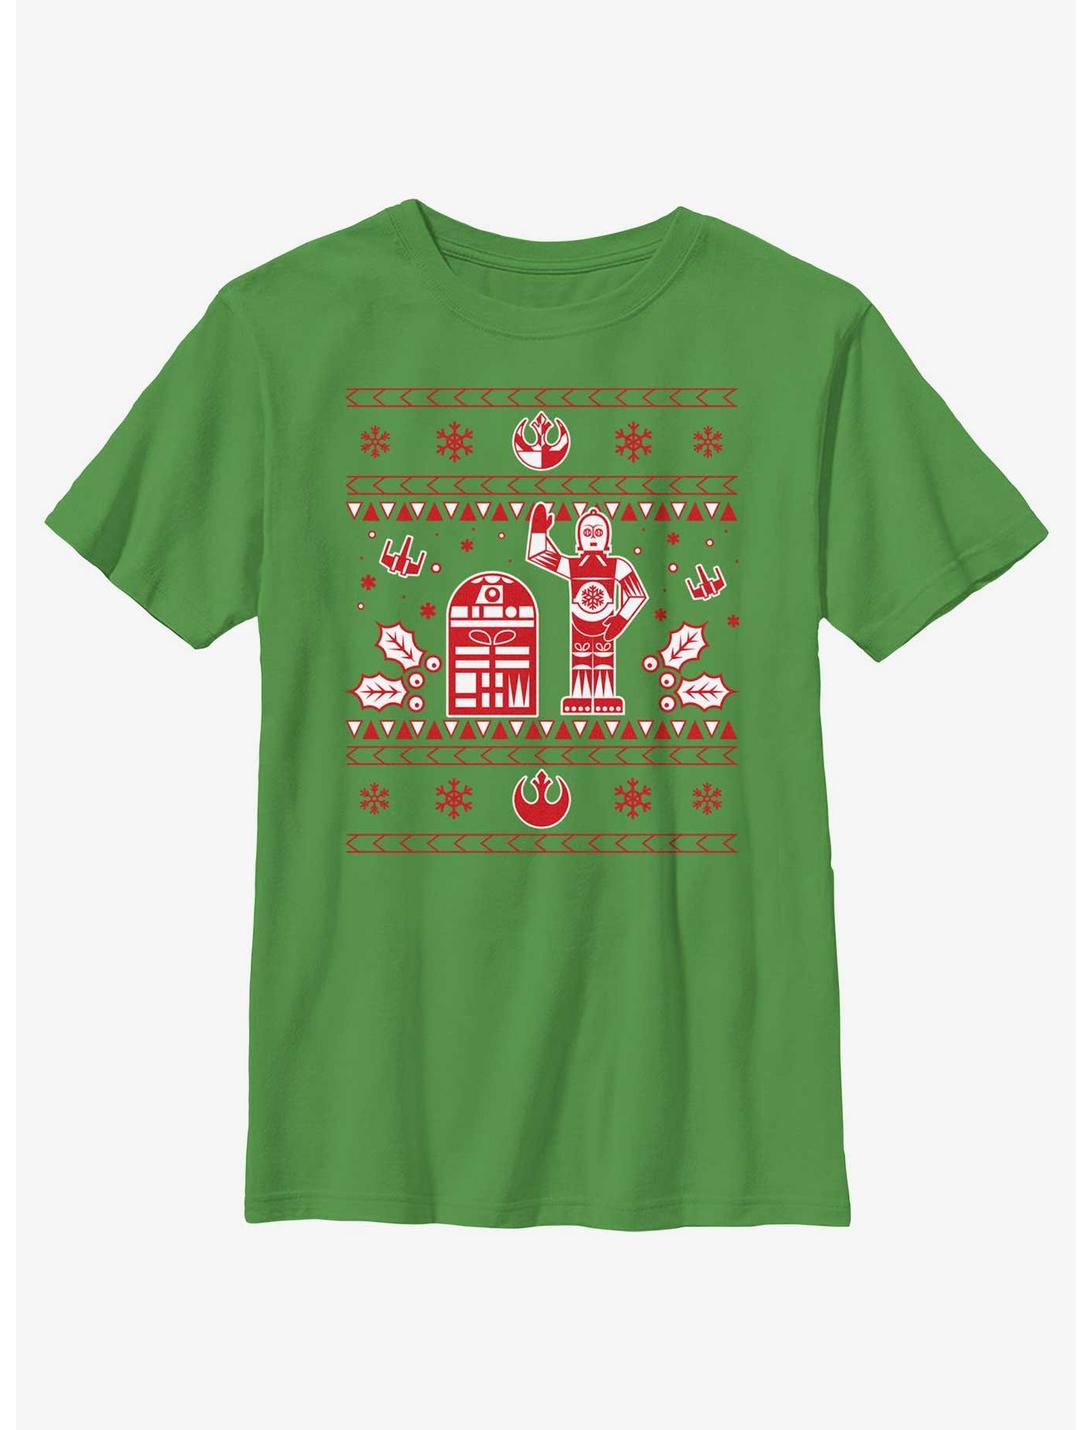 Star Wars Droid Ugly Christmas Pattern Youth T-Shirt, KELLY, hi-res